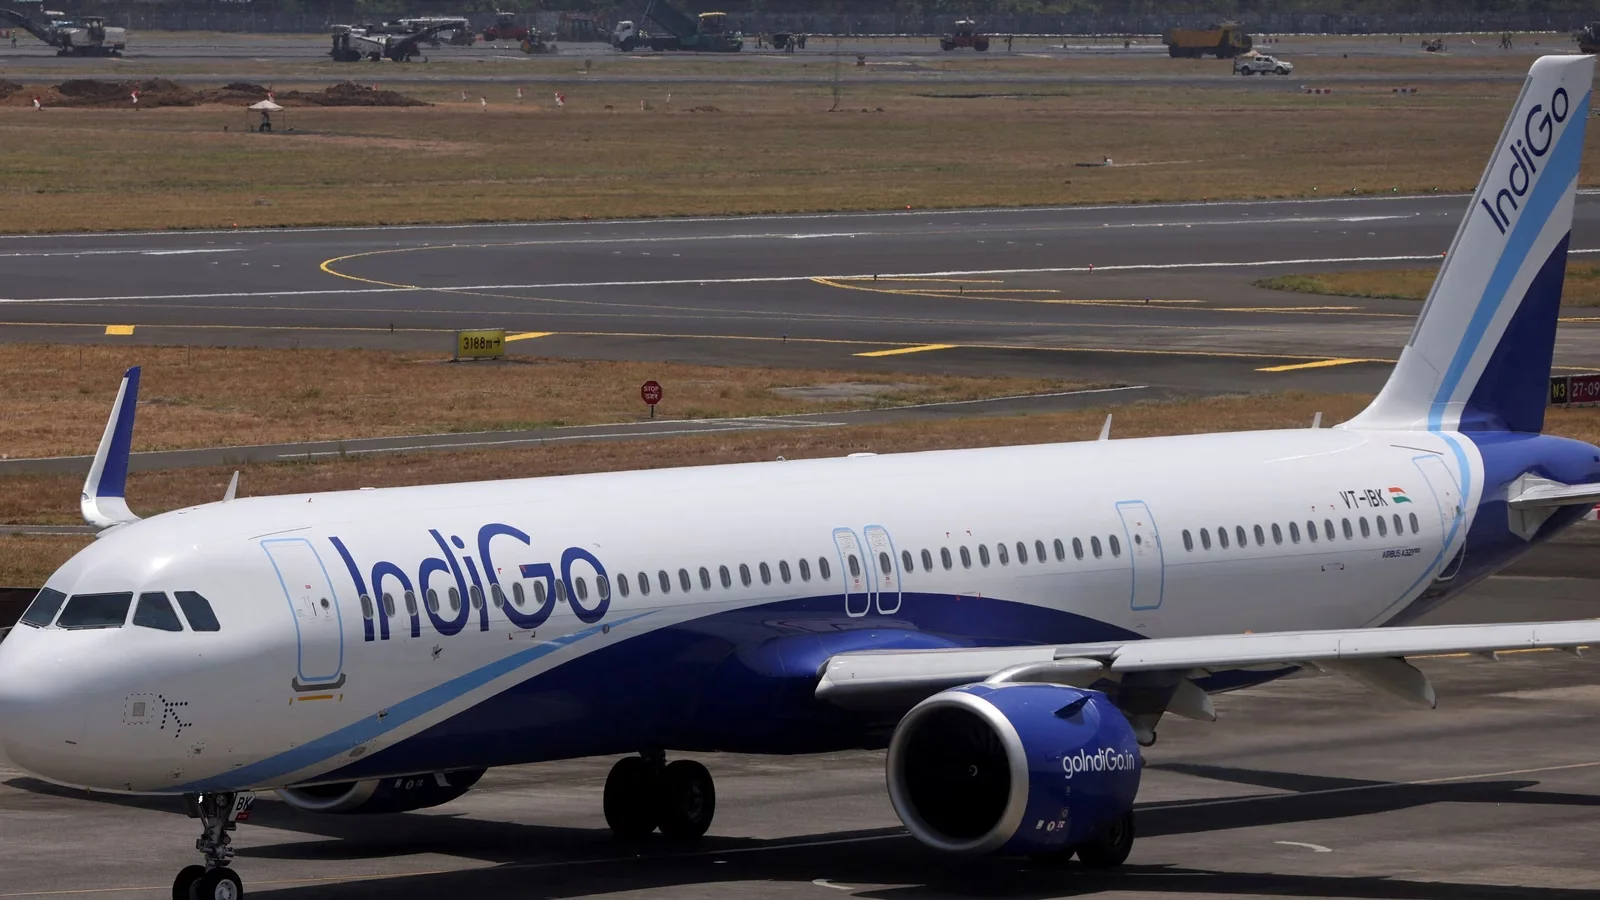 IndiGo makes history, becomes first Indian airline to carry 100 million passengers a year